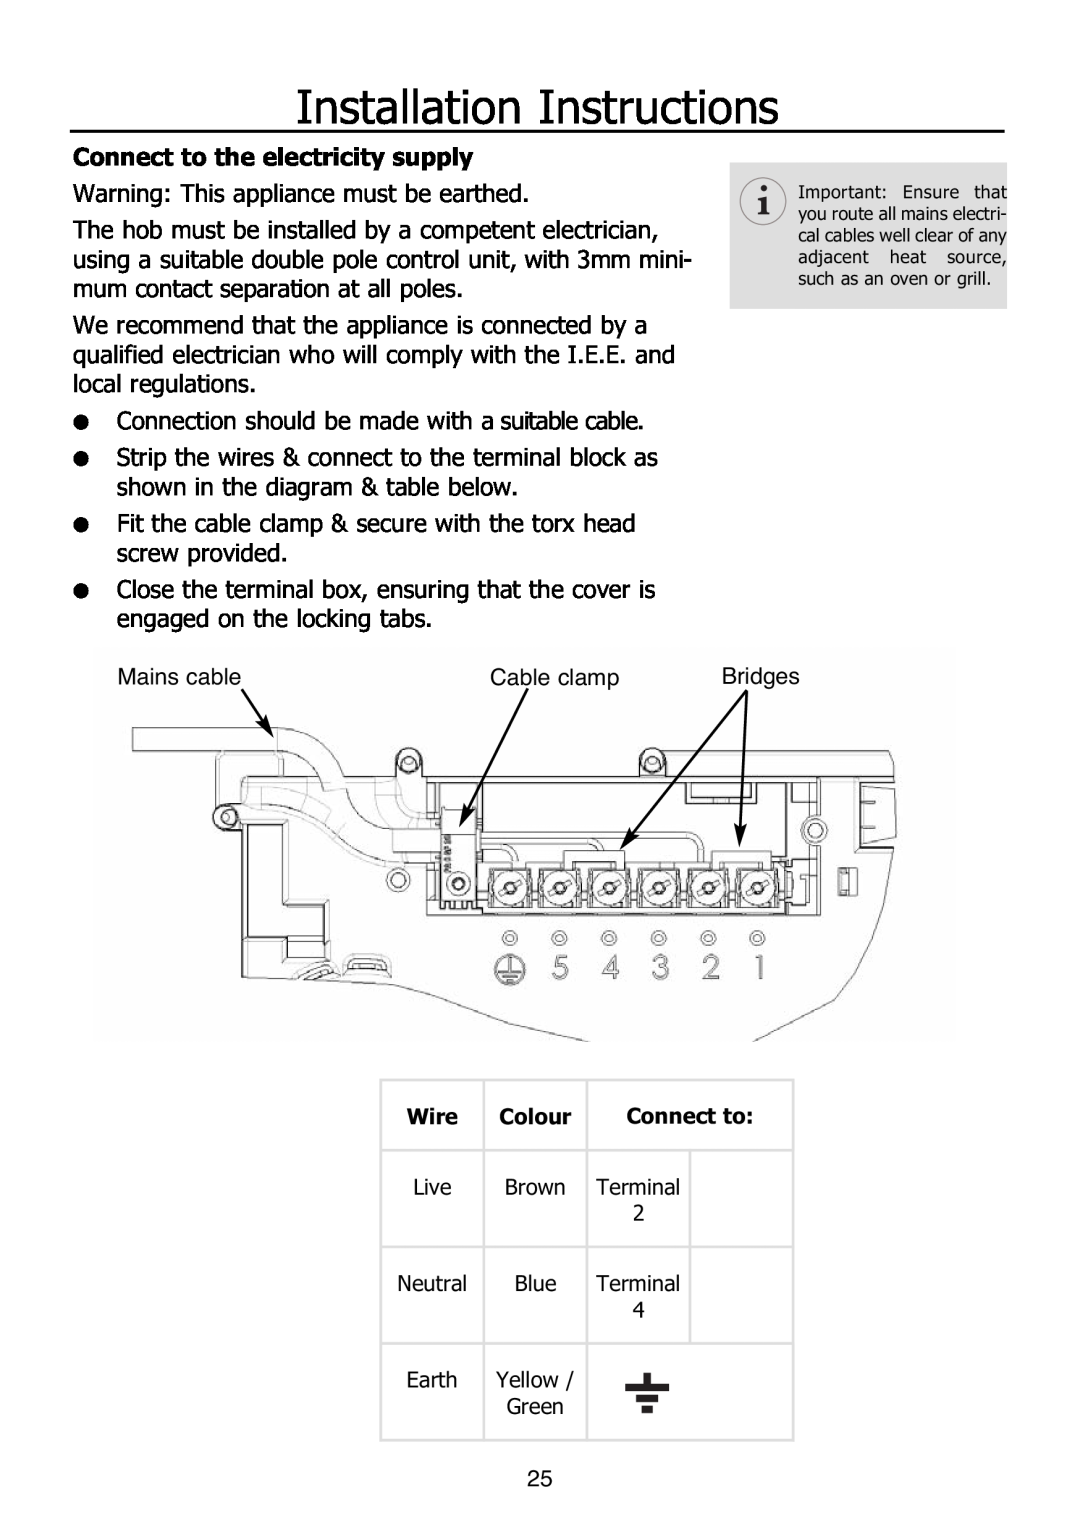 Glen Dimplex Home Appliances Ltd PBI60R Connect to the electricity supply, Installation Instructions 